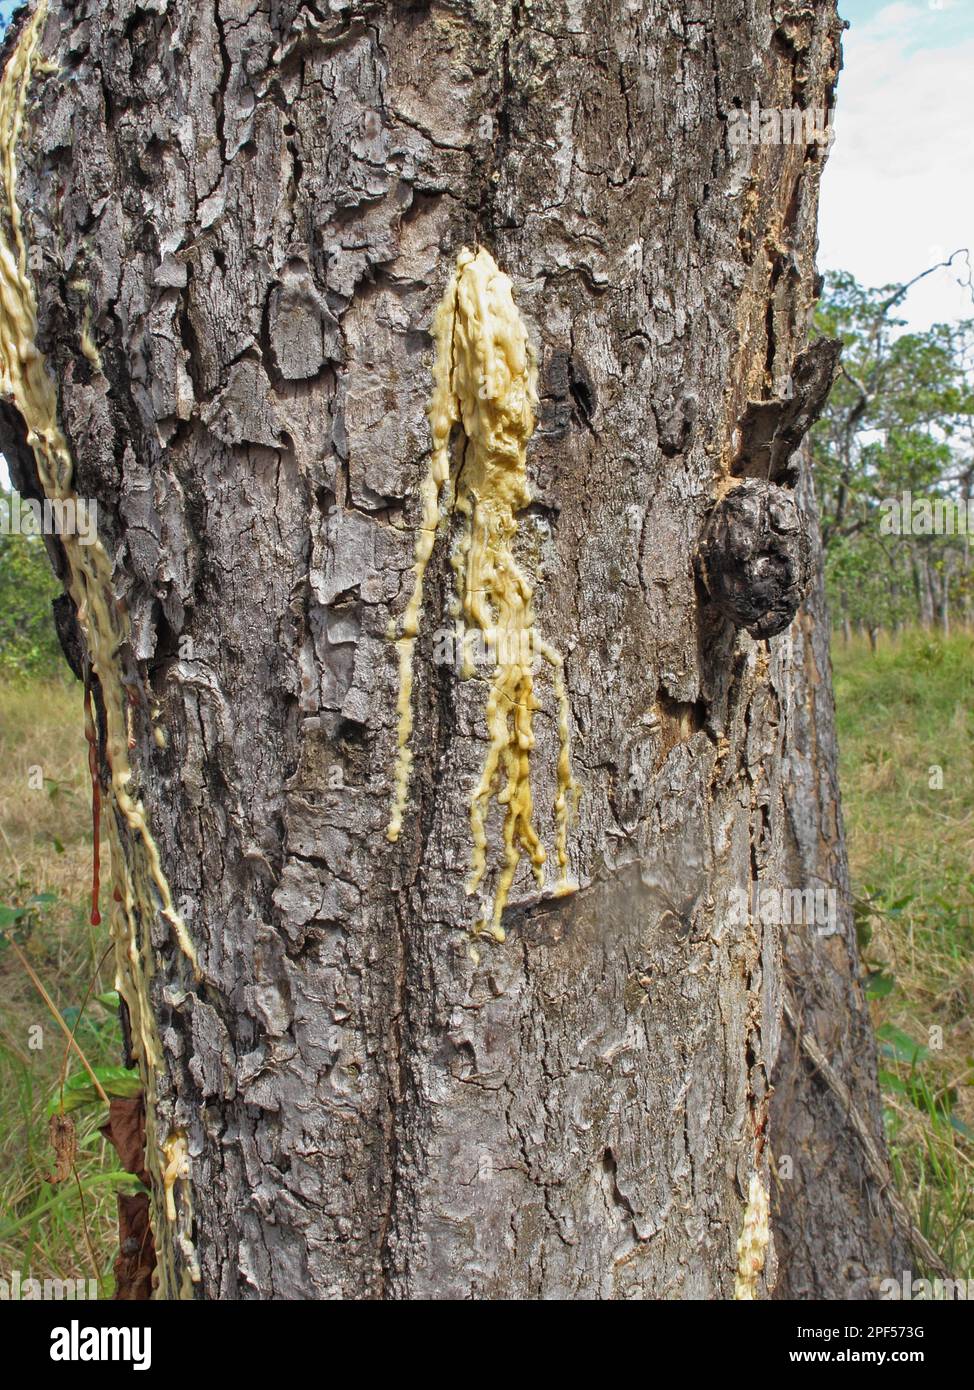 Hairy-leaved resin tree (Dipterocarpus alatus) Close-up of stem with resin escaping naturally, Prey Veng, Cambodia Stock Photo